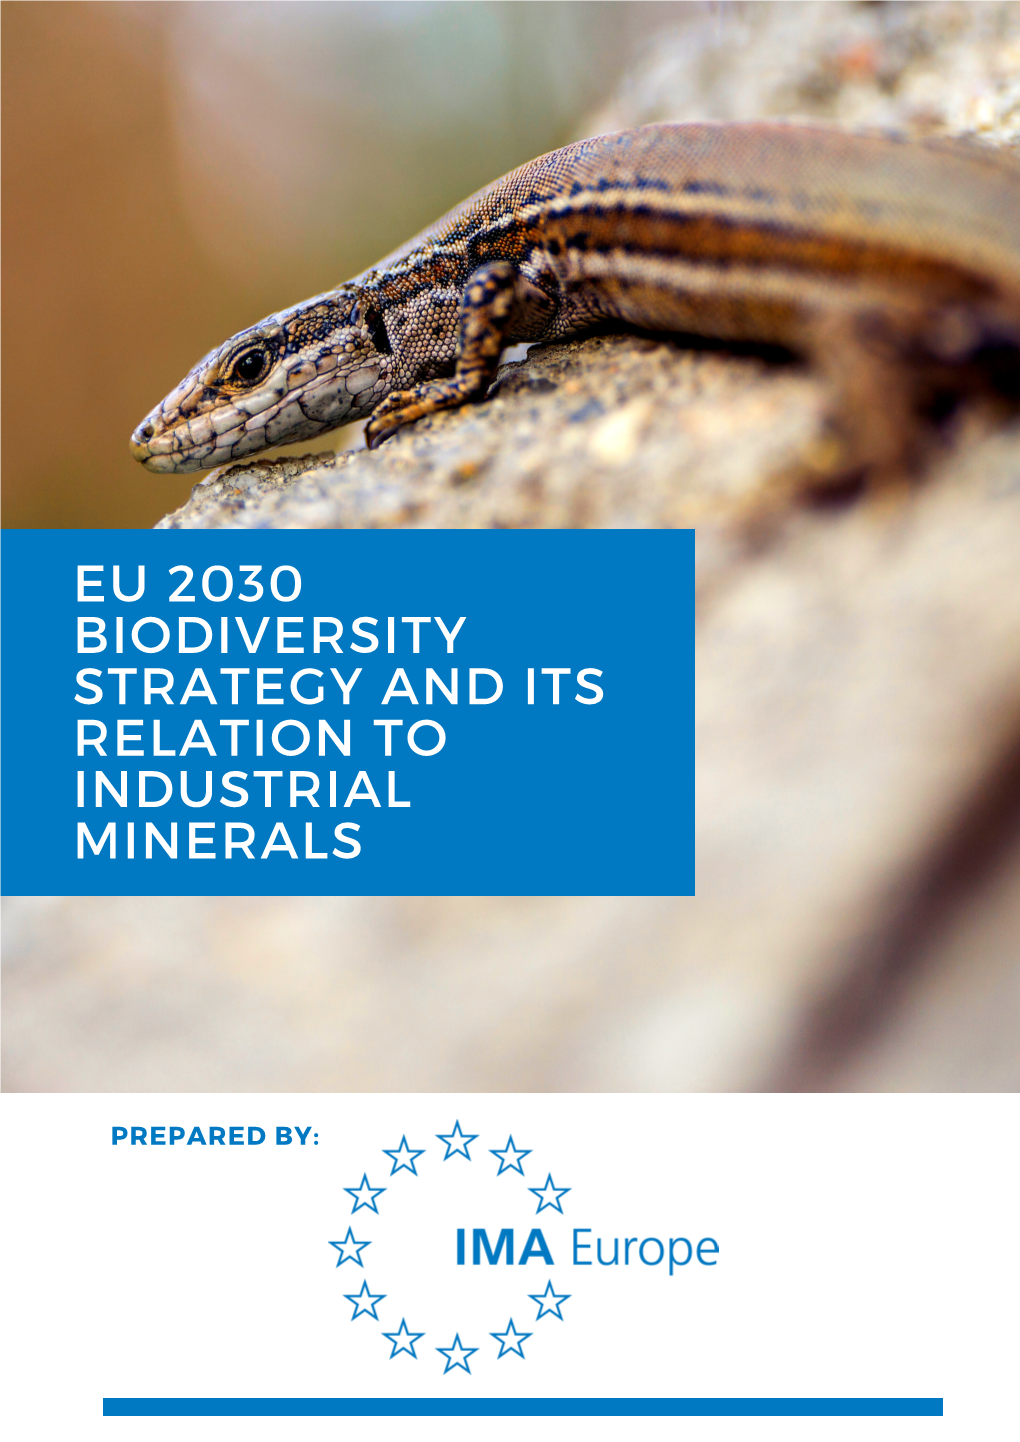 Eu 2030 Biodiversity Strategy and Its Relation to Industrial Minerals